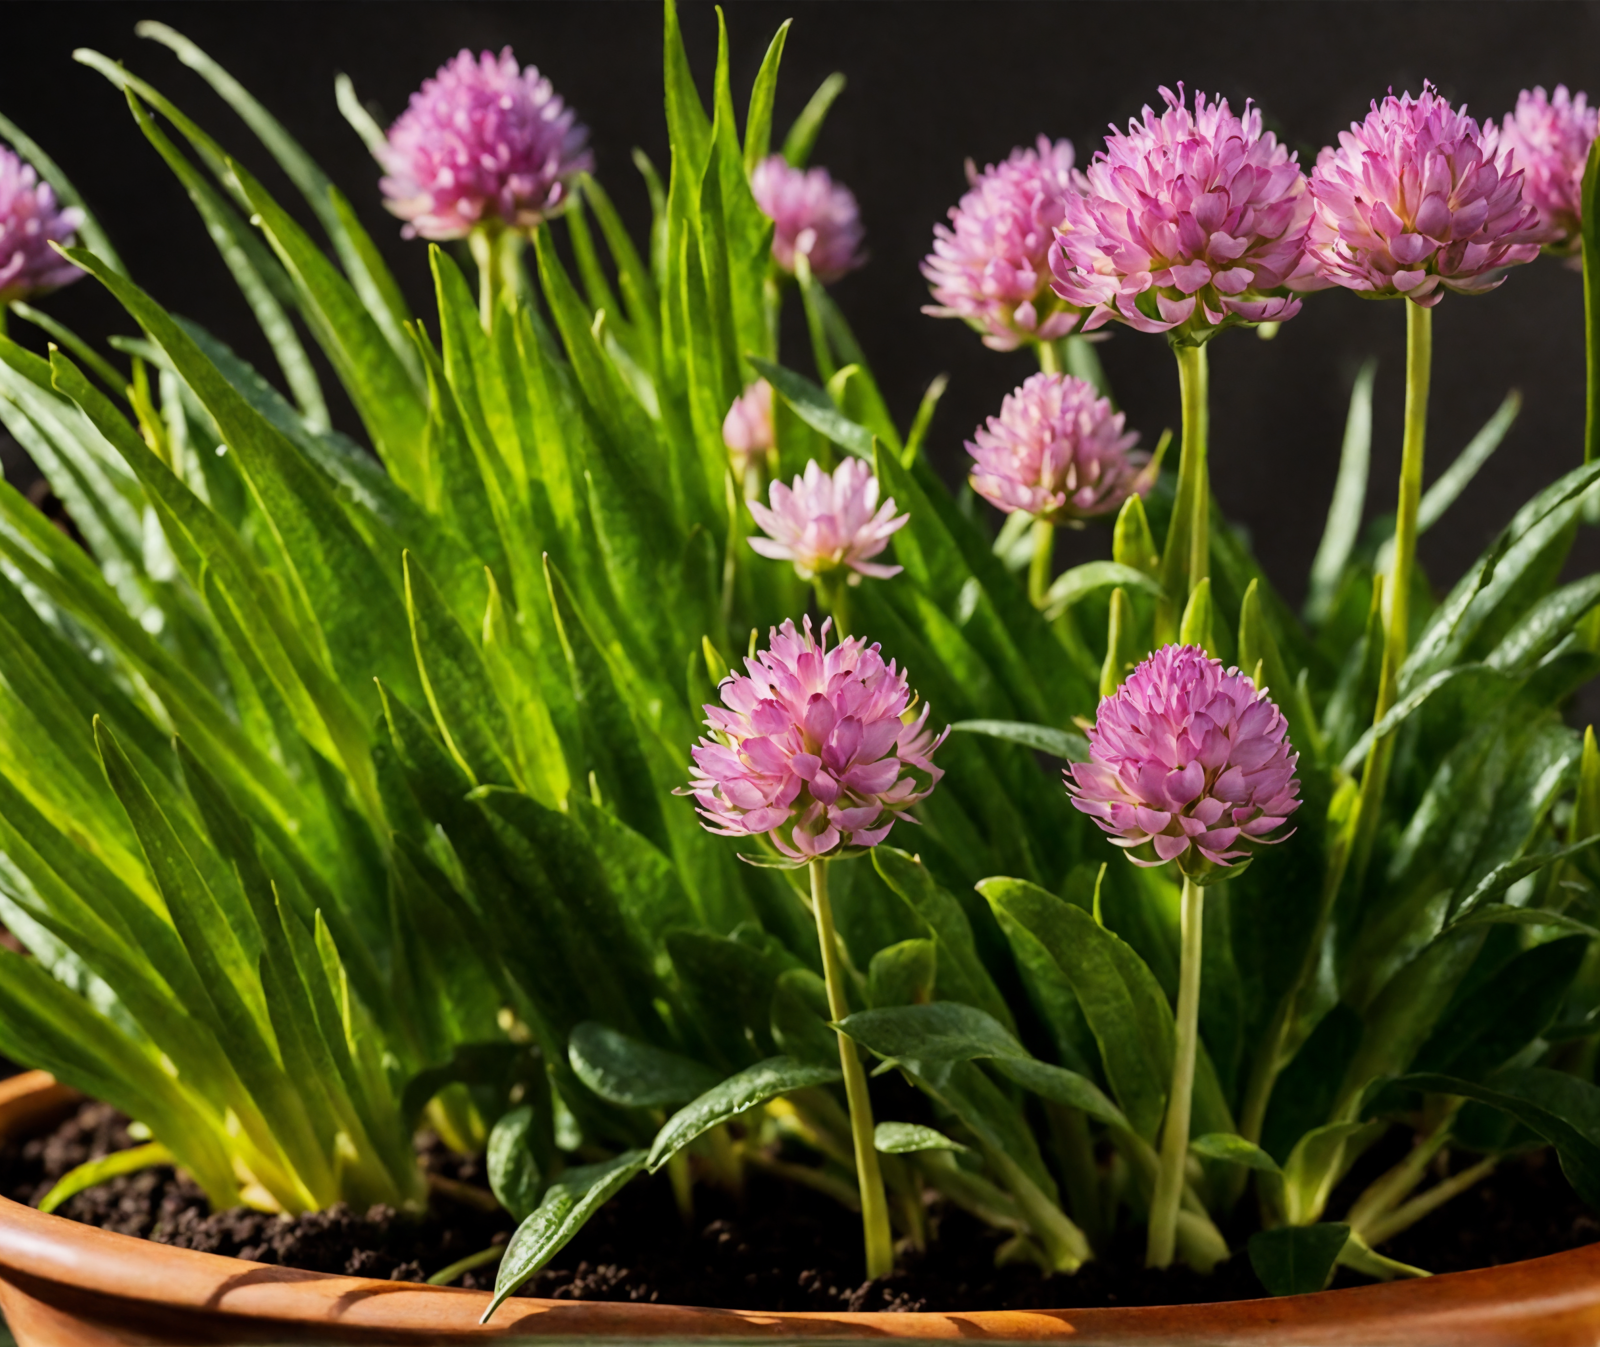 A cluster of Allium schoenoprasum (chives) with pink blooms in a basket, clear lighting, against a dark background.